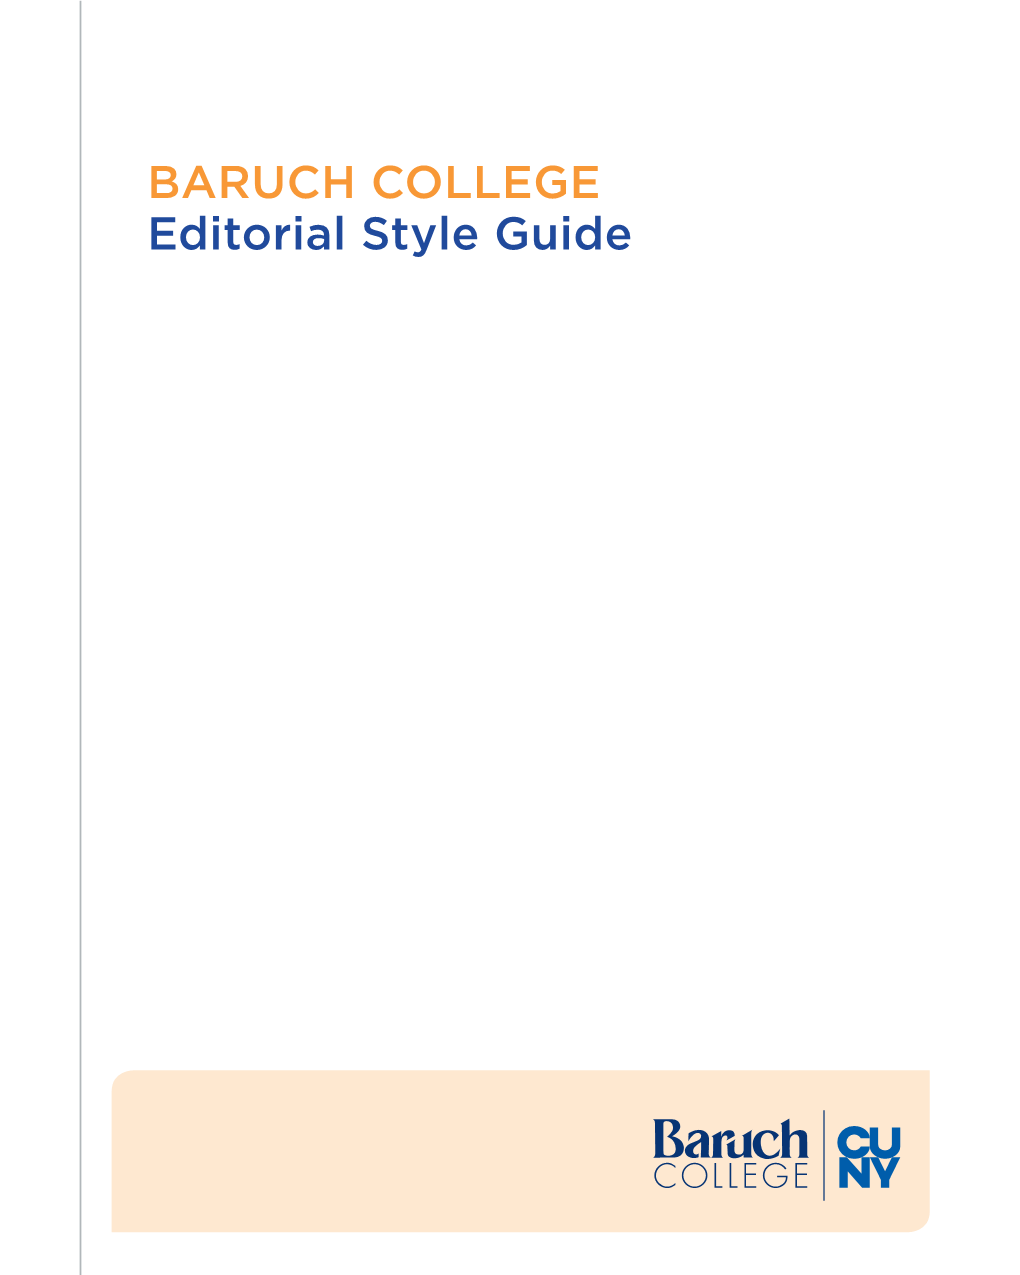 BARUCH COLLEGE Editorial Style Guide Office of Communications, Marketing & Public Affairs 646-660-6133 Communications@Baruch.Cuny.Edu VERSION: FALL 2018/WINTER 2019